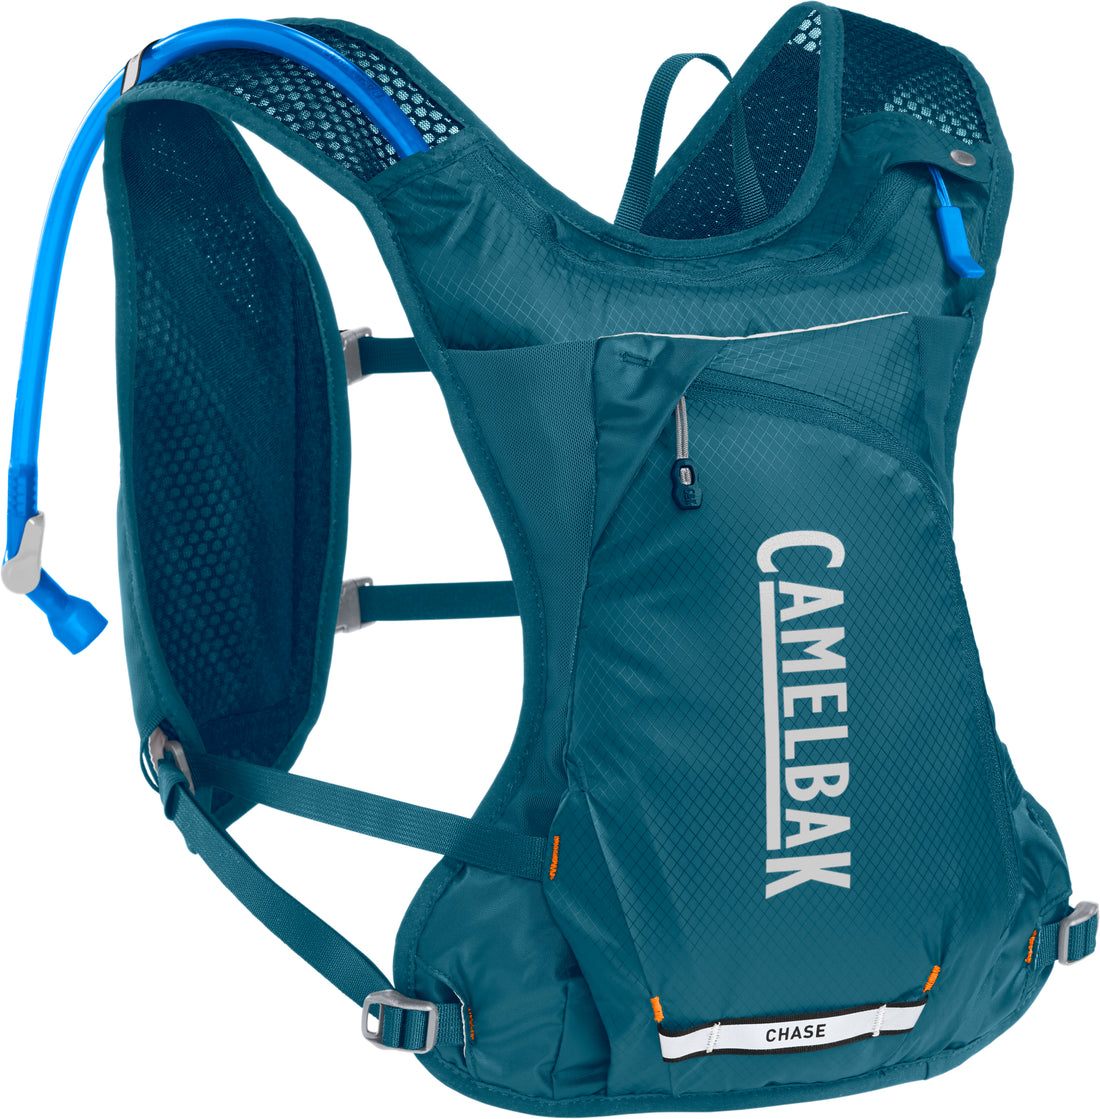 Camelbak|CHASE_RACE_4_VEST|Cycle_LM